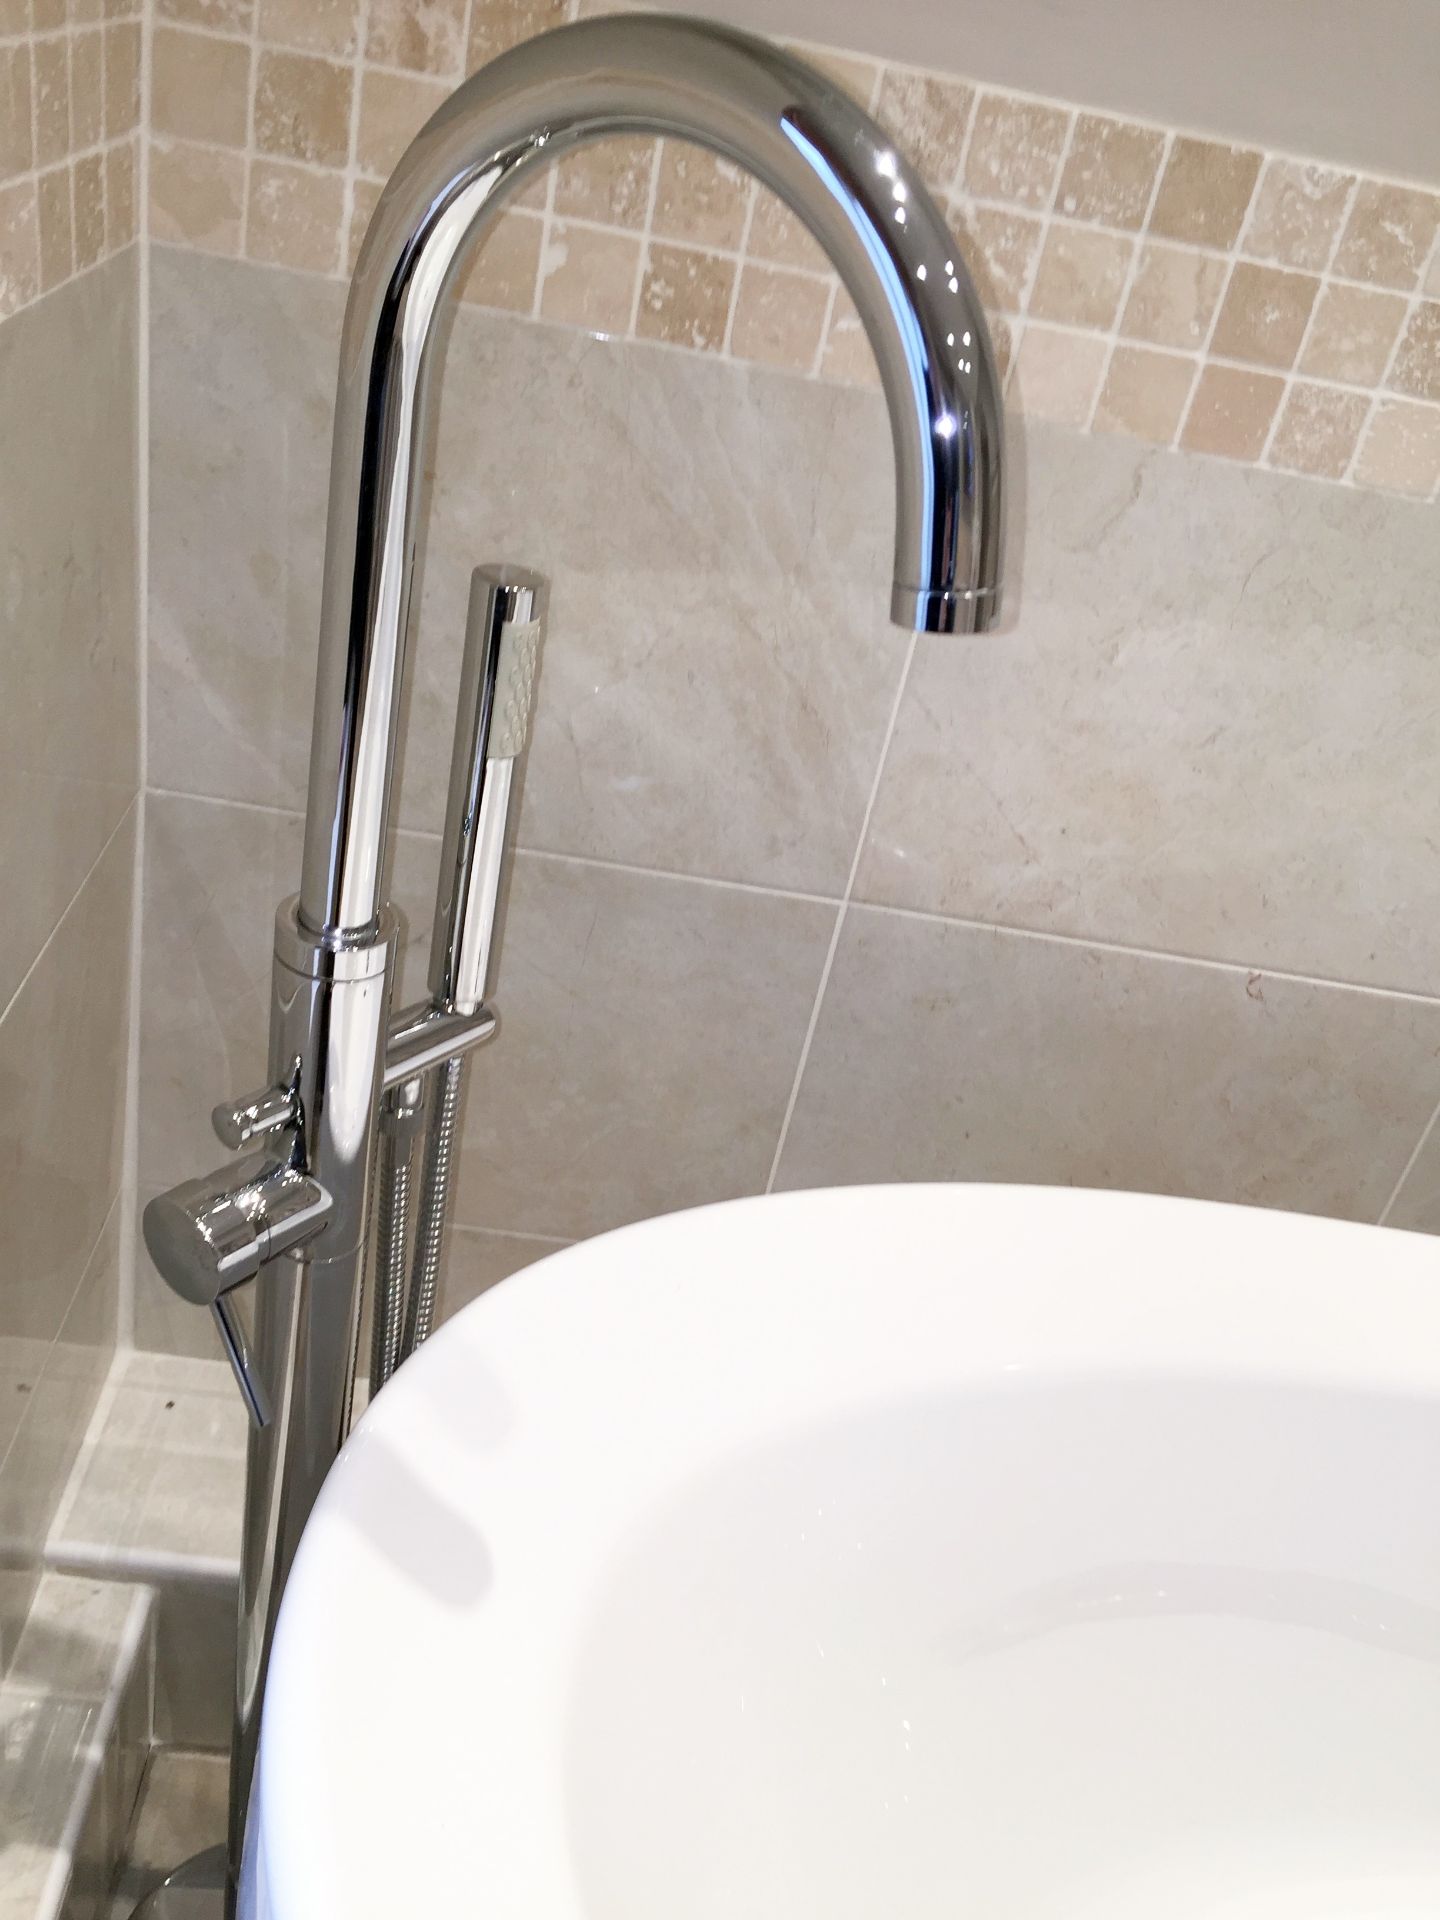 1 x Bath With A Floor Mounted Bath Filler Tap - Preowned In Good Condition - More Information To - Image 2 of 8